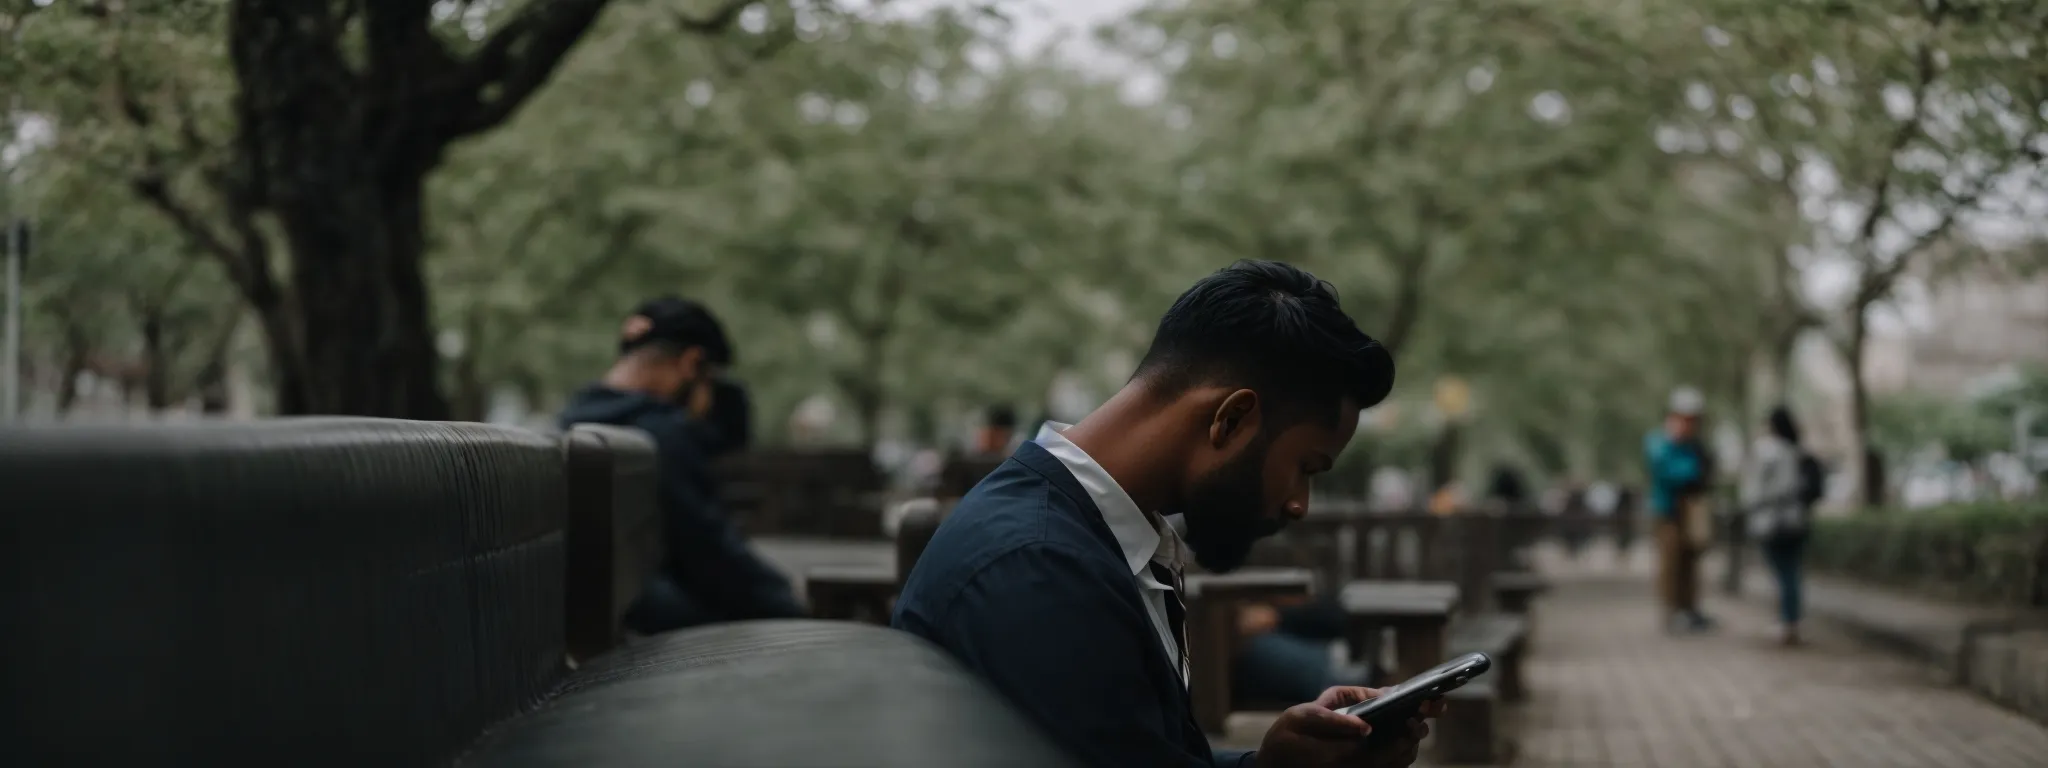 a person sitting on a bench absorbed in using a smartphone, with a clear, unfocused background.